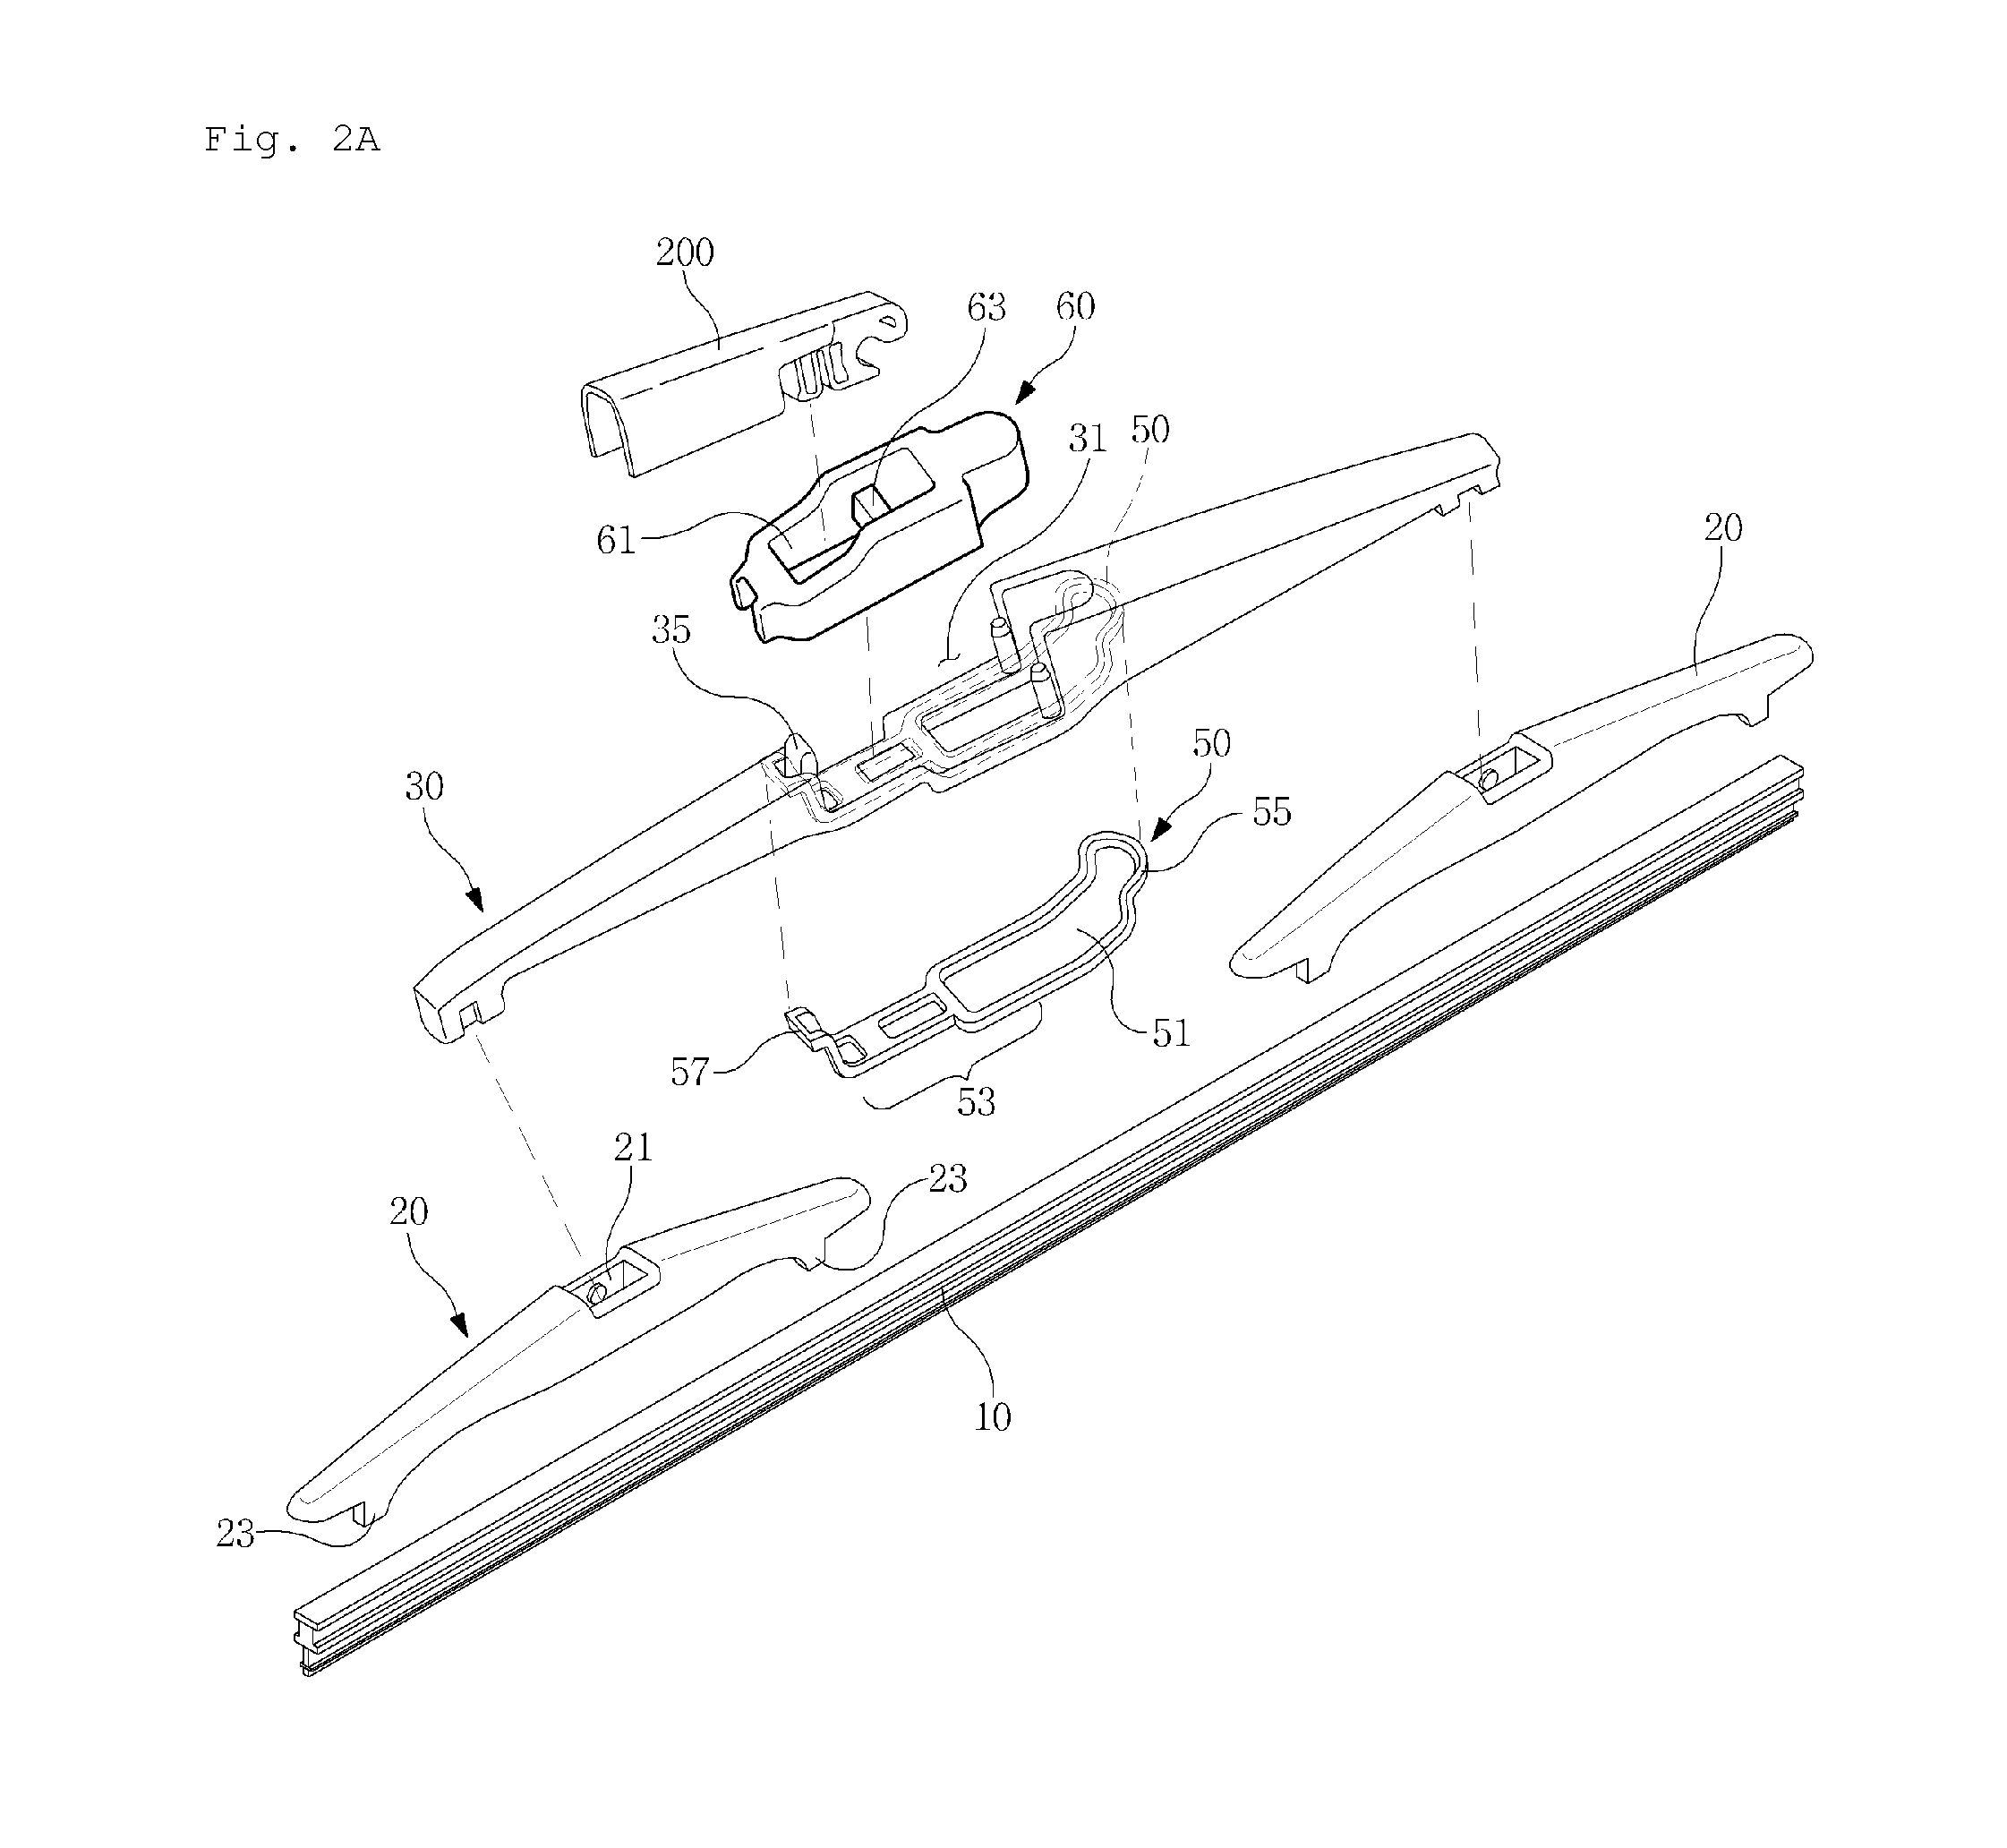 Wiper blade assembly structure